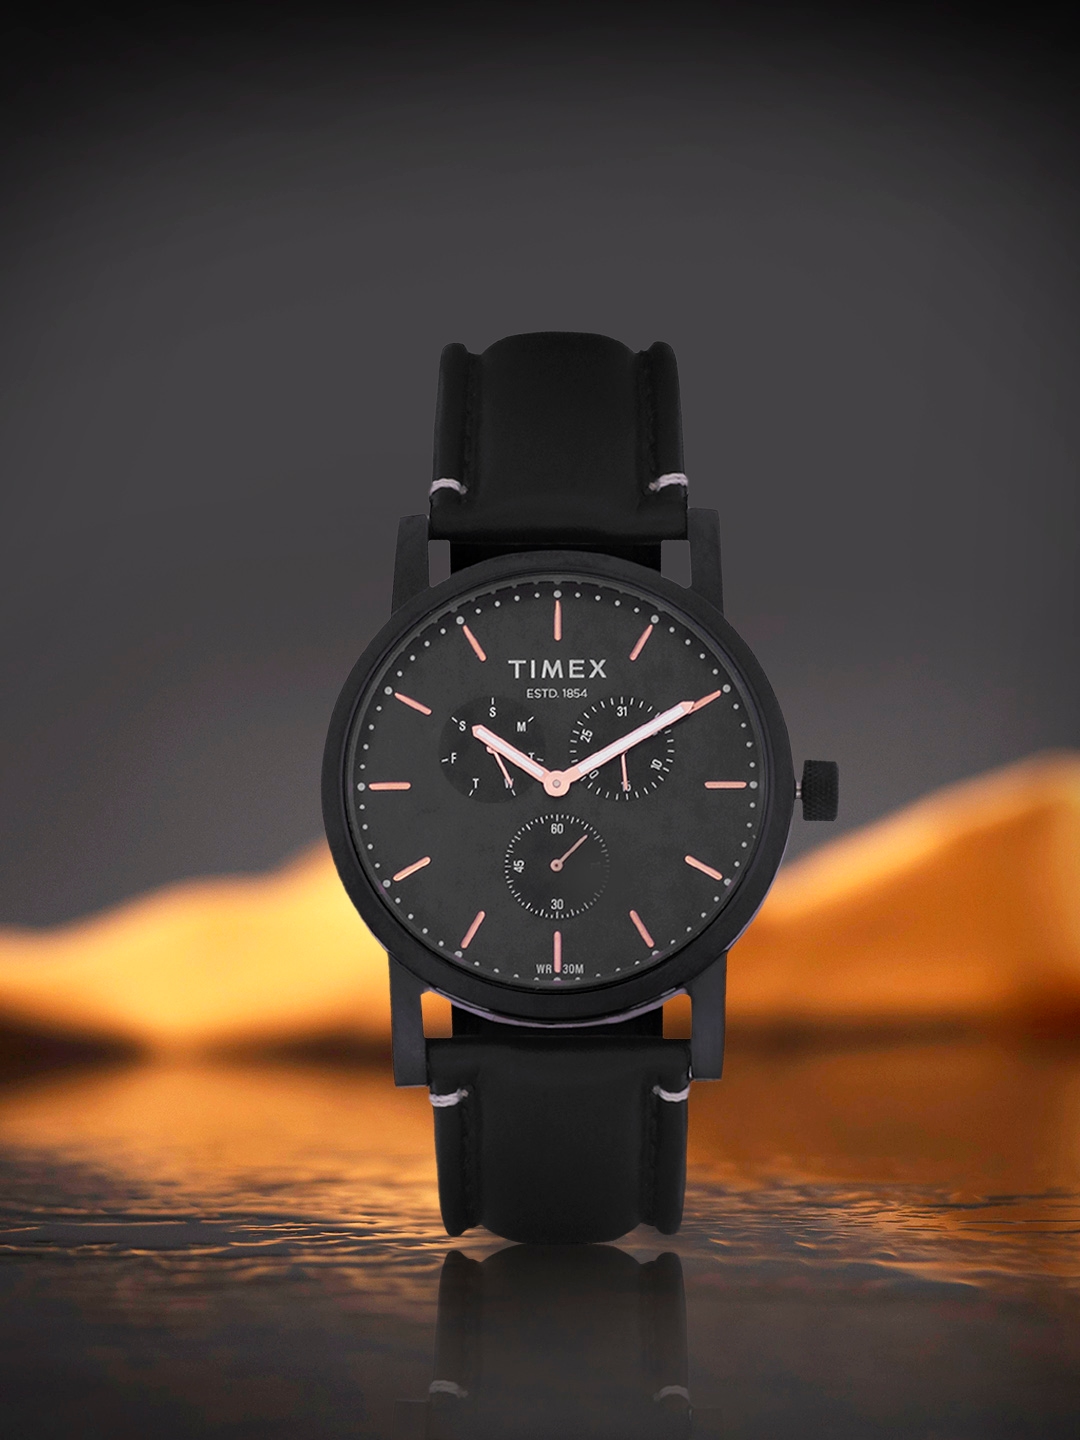 Timex : Men's & Women's Watches-cokhiquangminh.vn